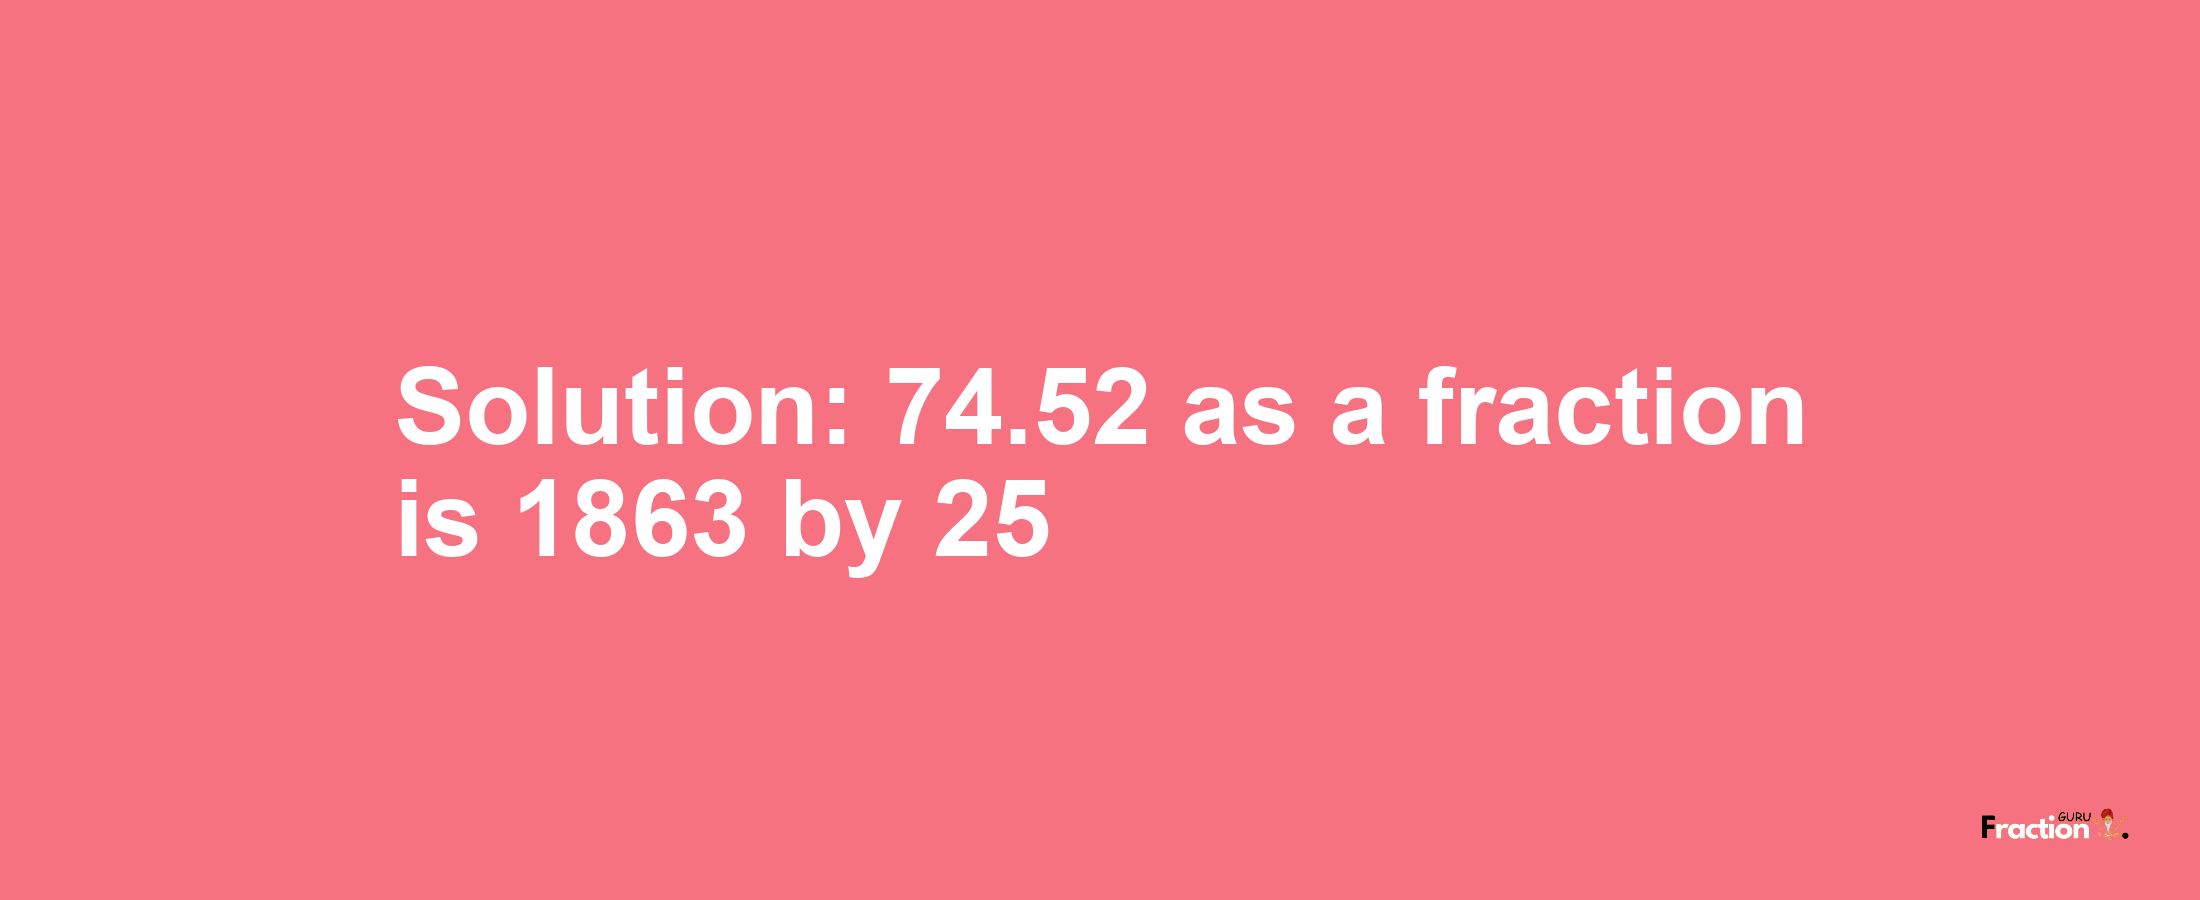 Solution:74.52 as a fraction is 1863/25